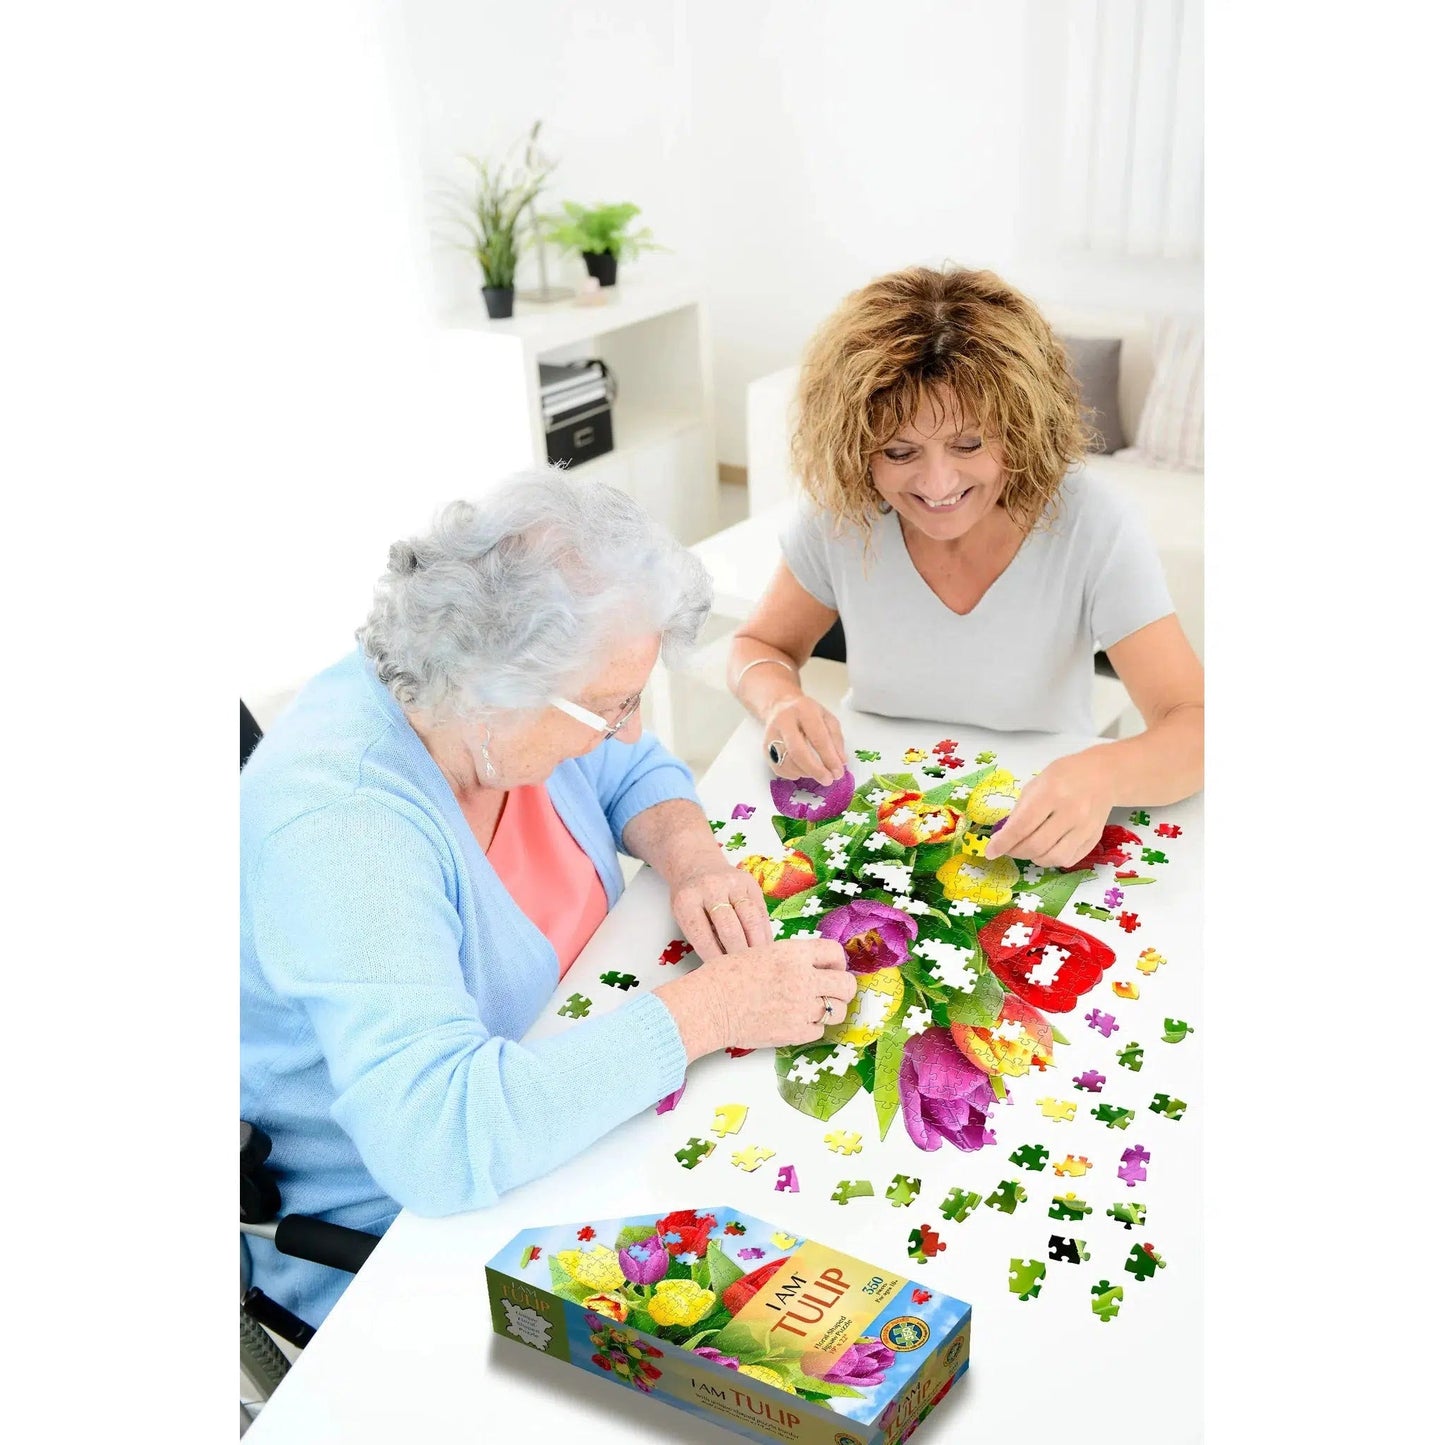 I Am Tulip 350 Piece Floral Shaped Jigsaw Puzzle Madd Capp